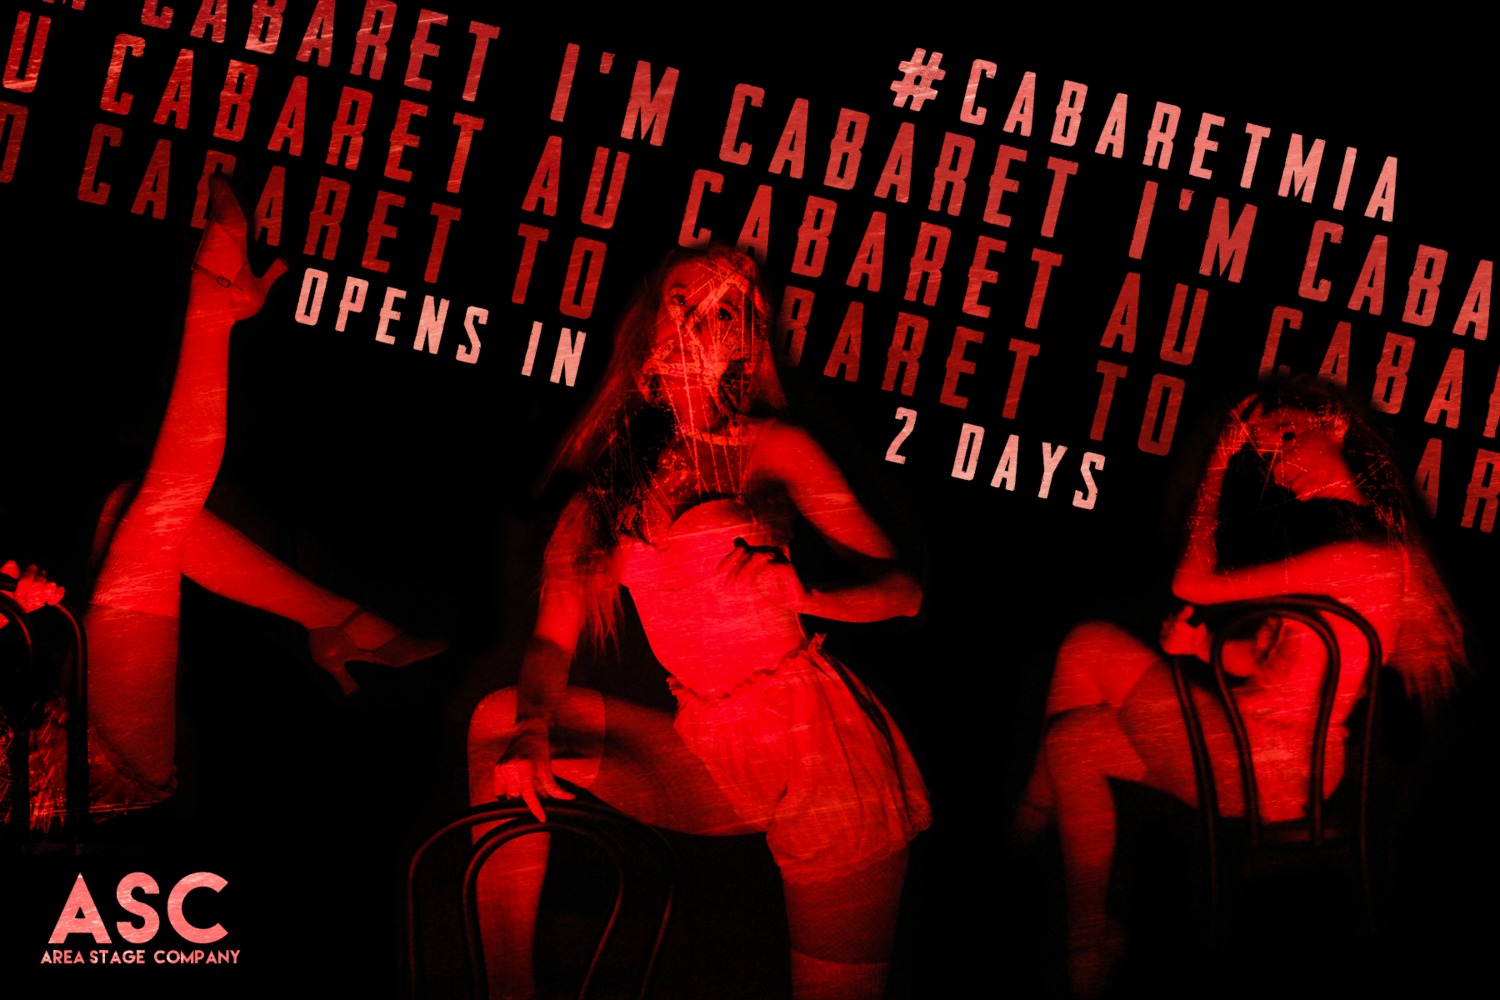 Just two more days until life is a Cabaret! 1